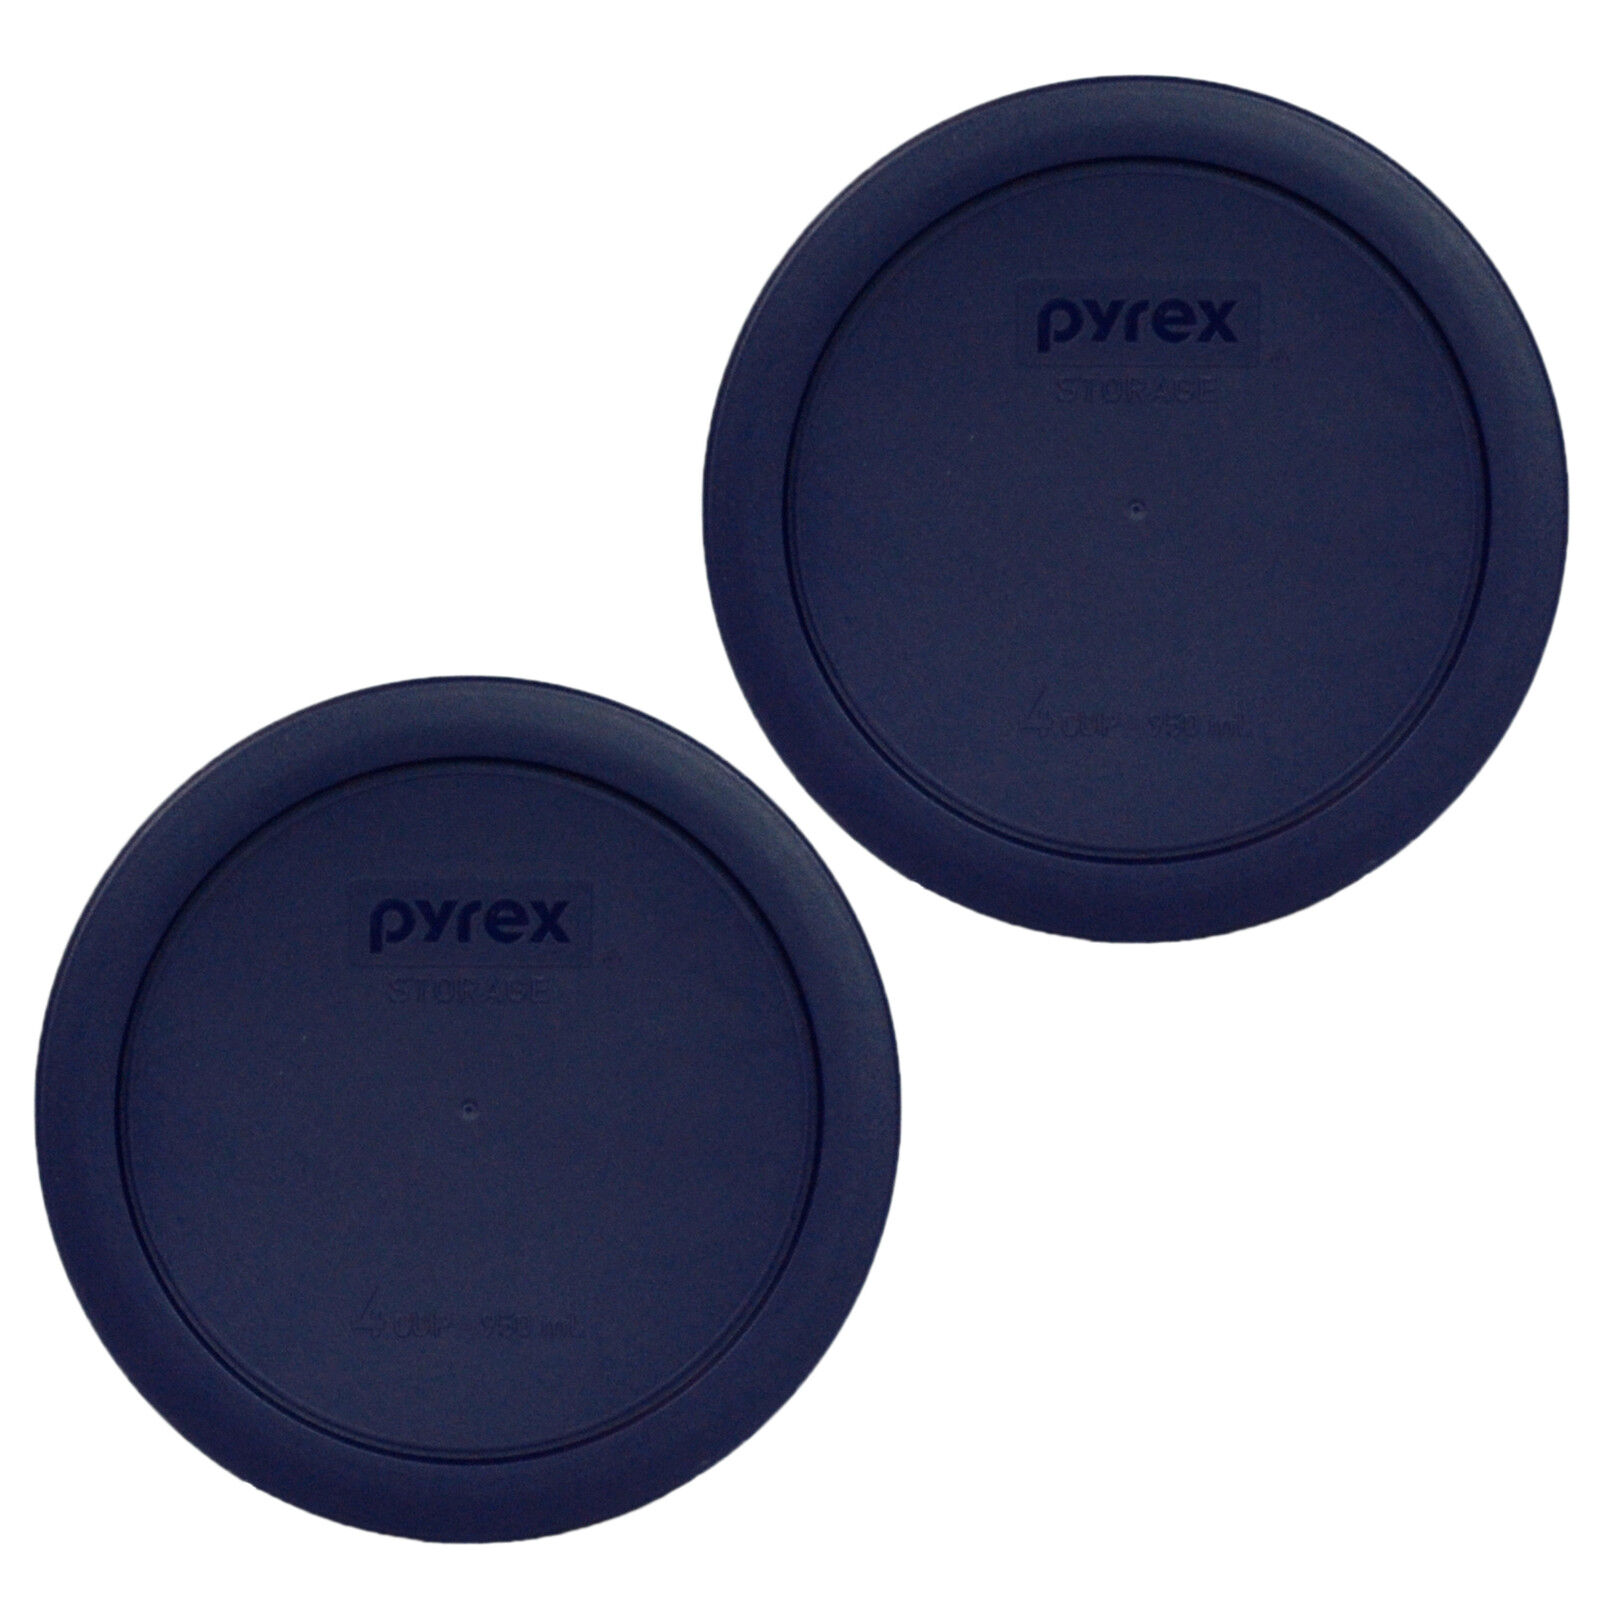 Pyrex 7201-PC Round 4 Cup Storage Lid Cover Blue 2 Pack for Glass Bowl Pyrex 7201PC